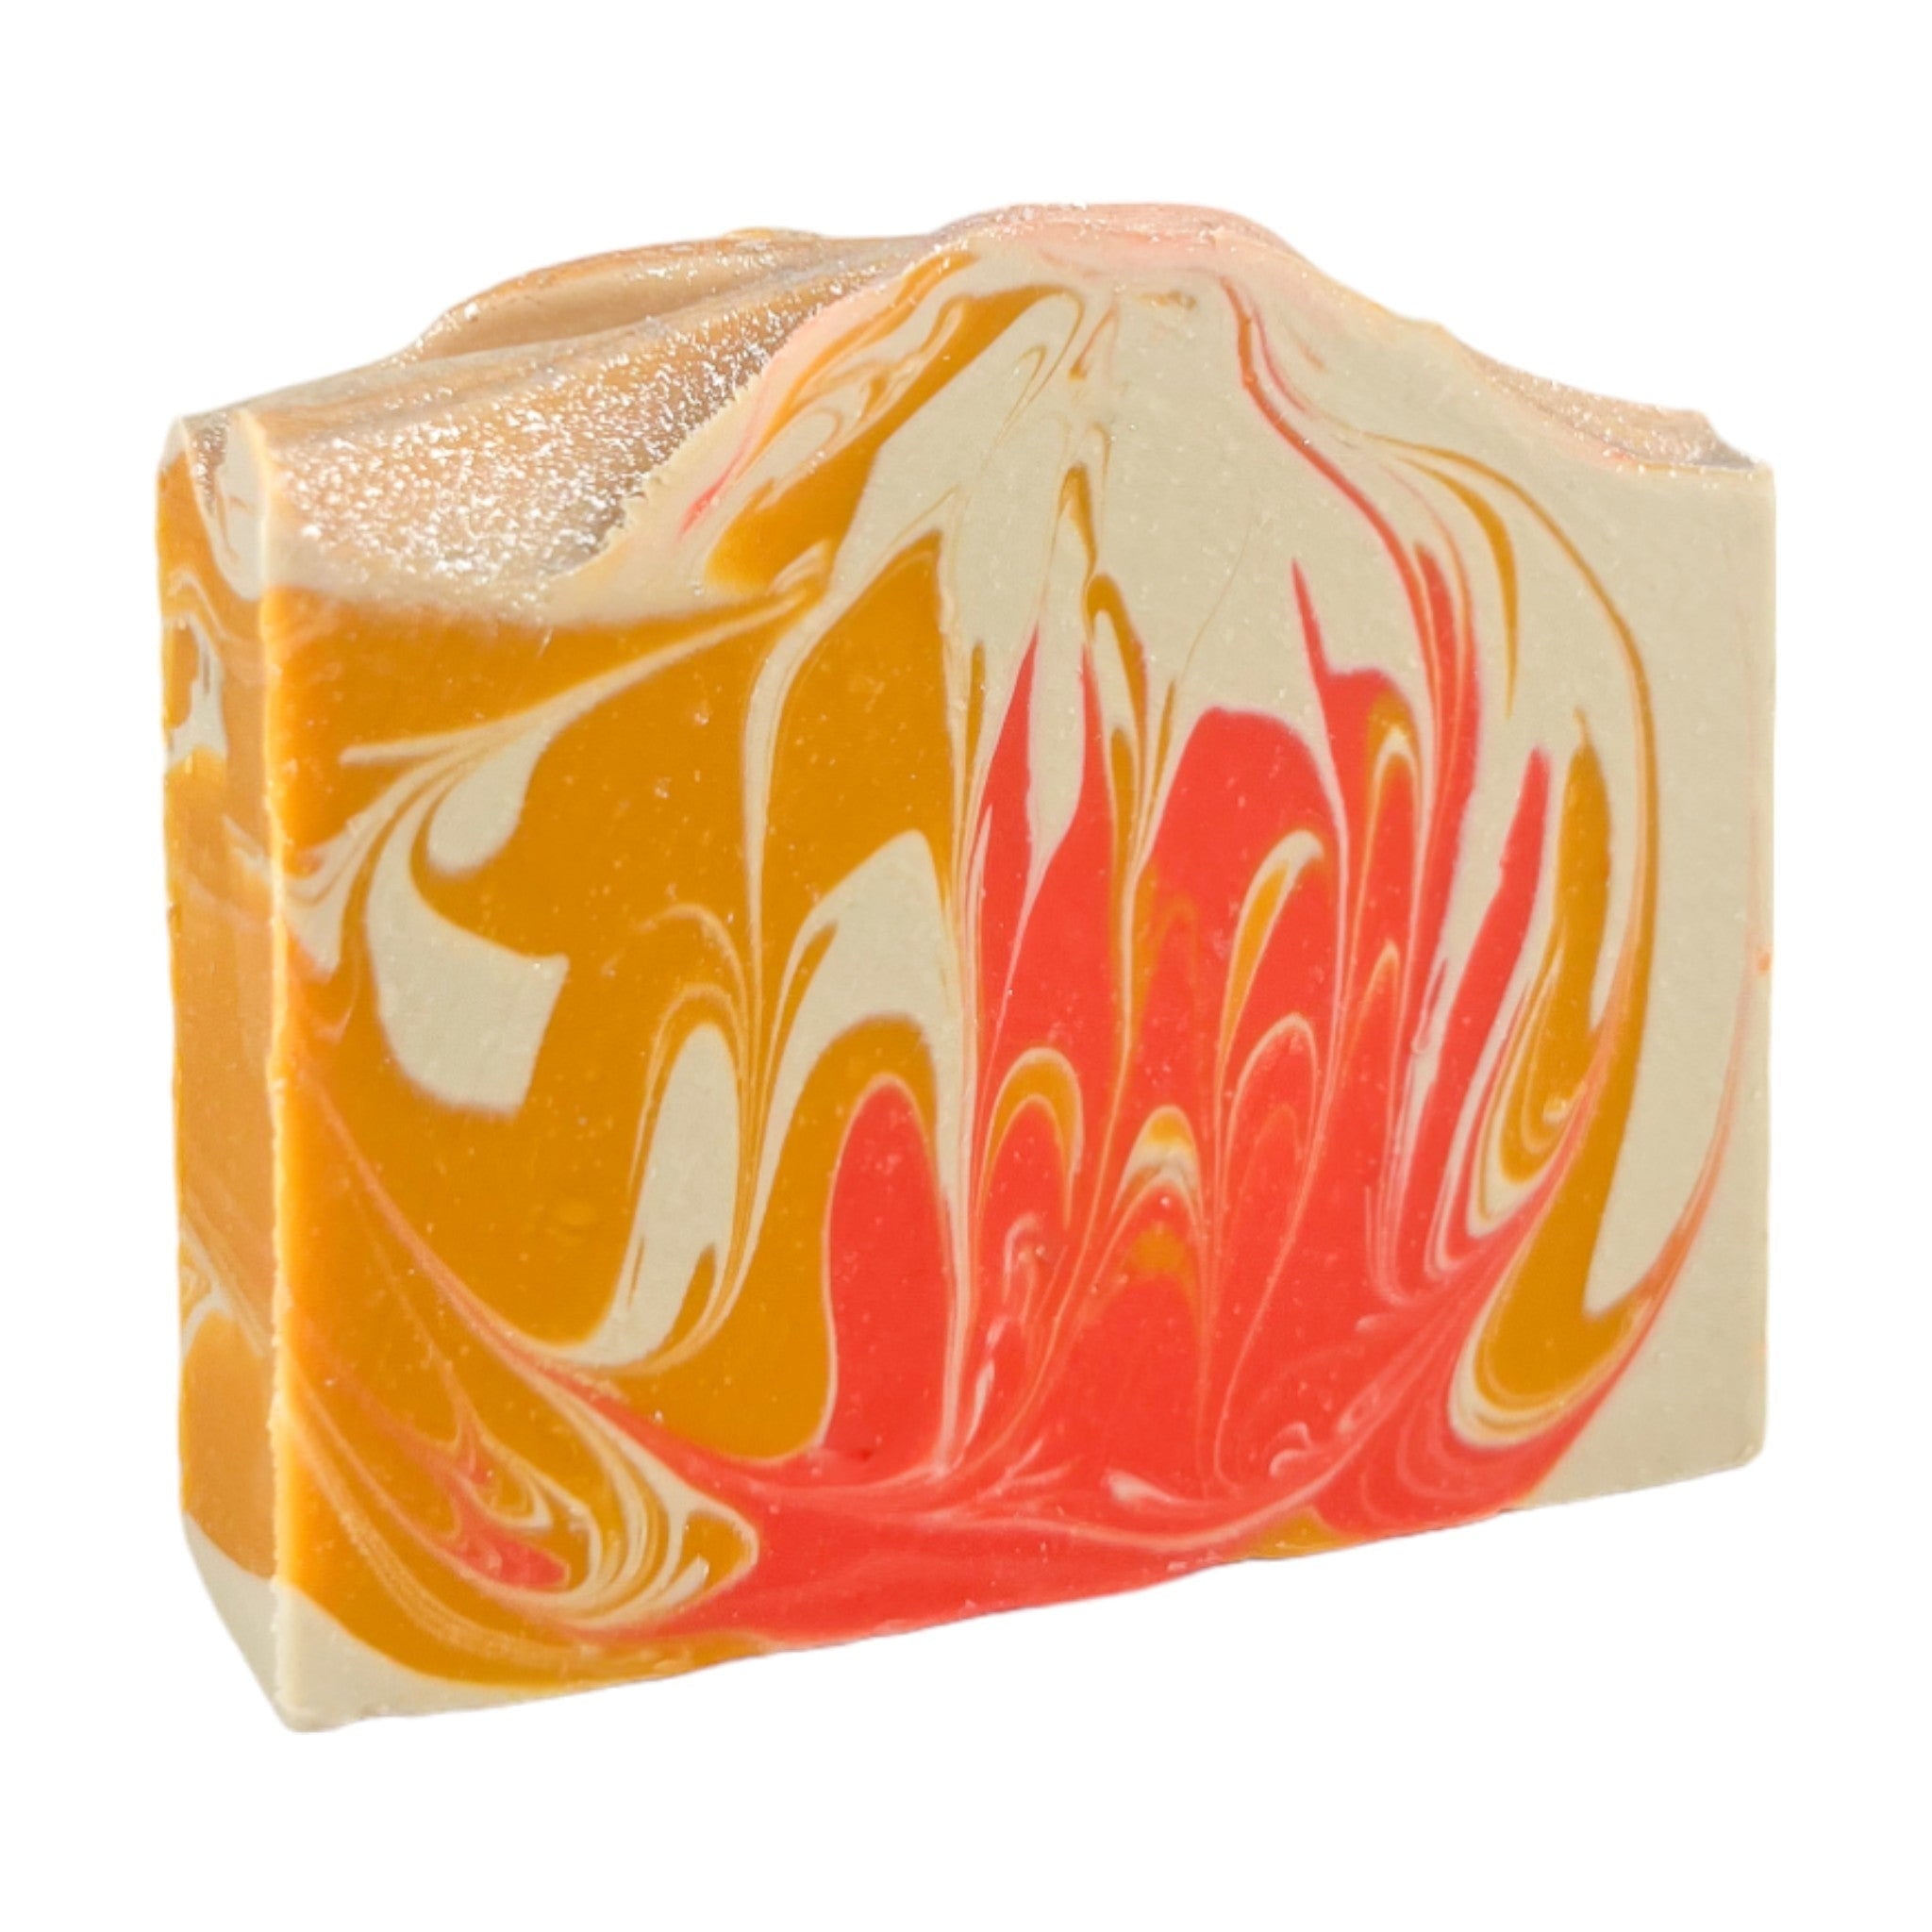 Orange You Beautiful -Bar Soap - Old Town Soap Co.